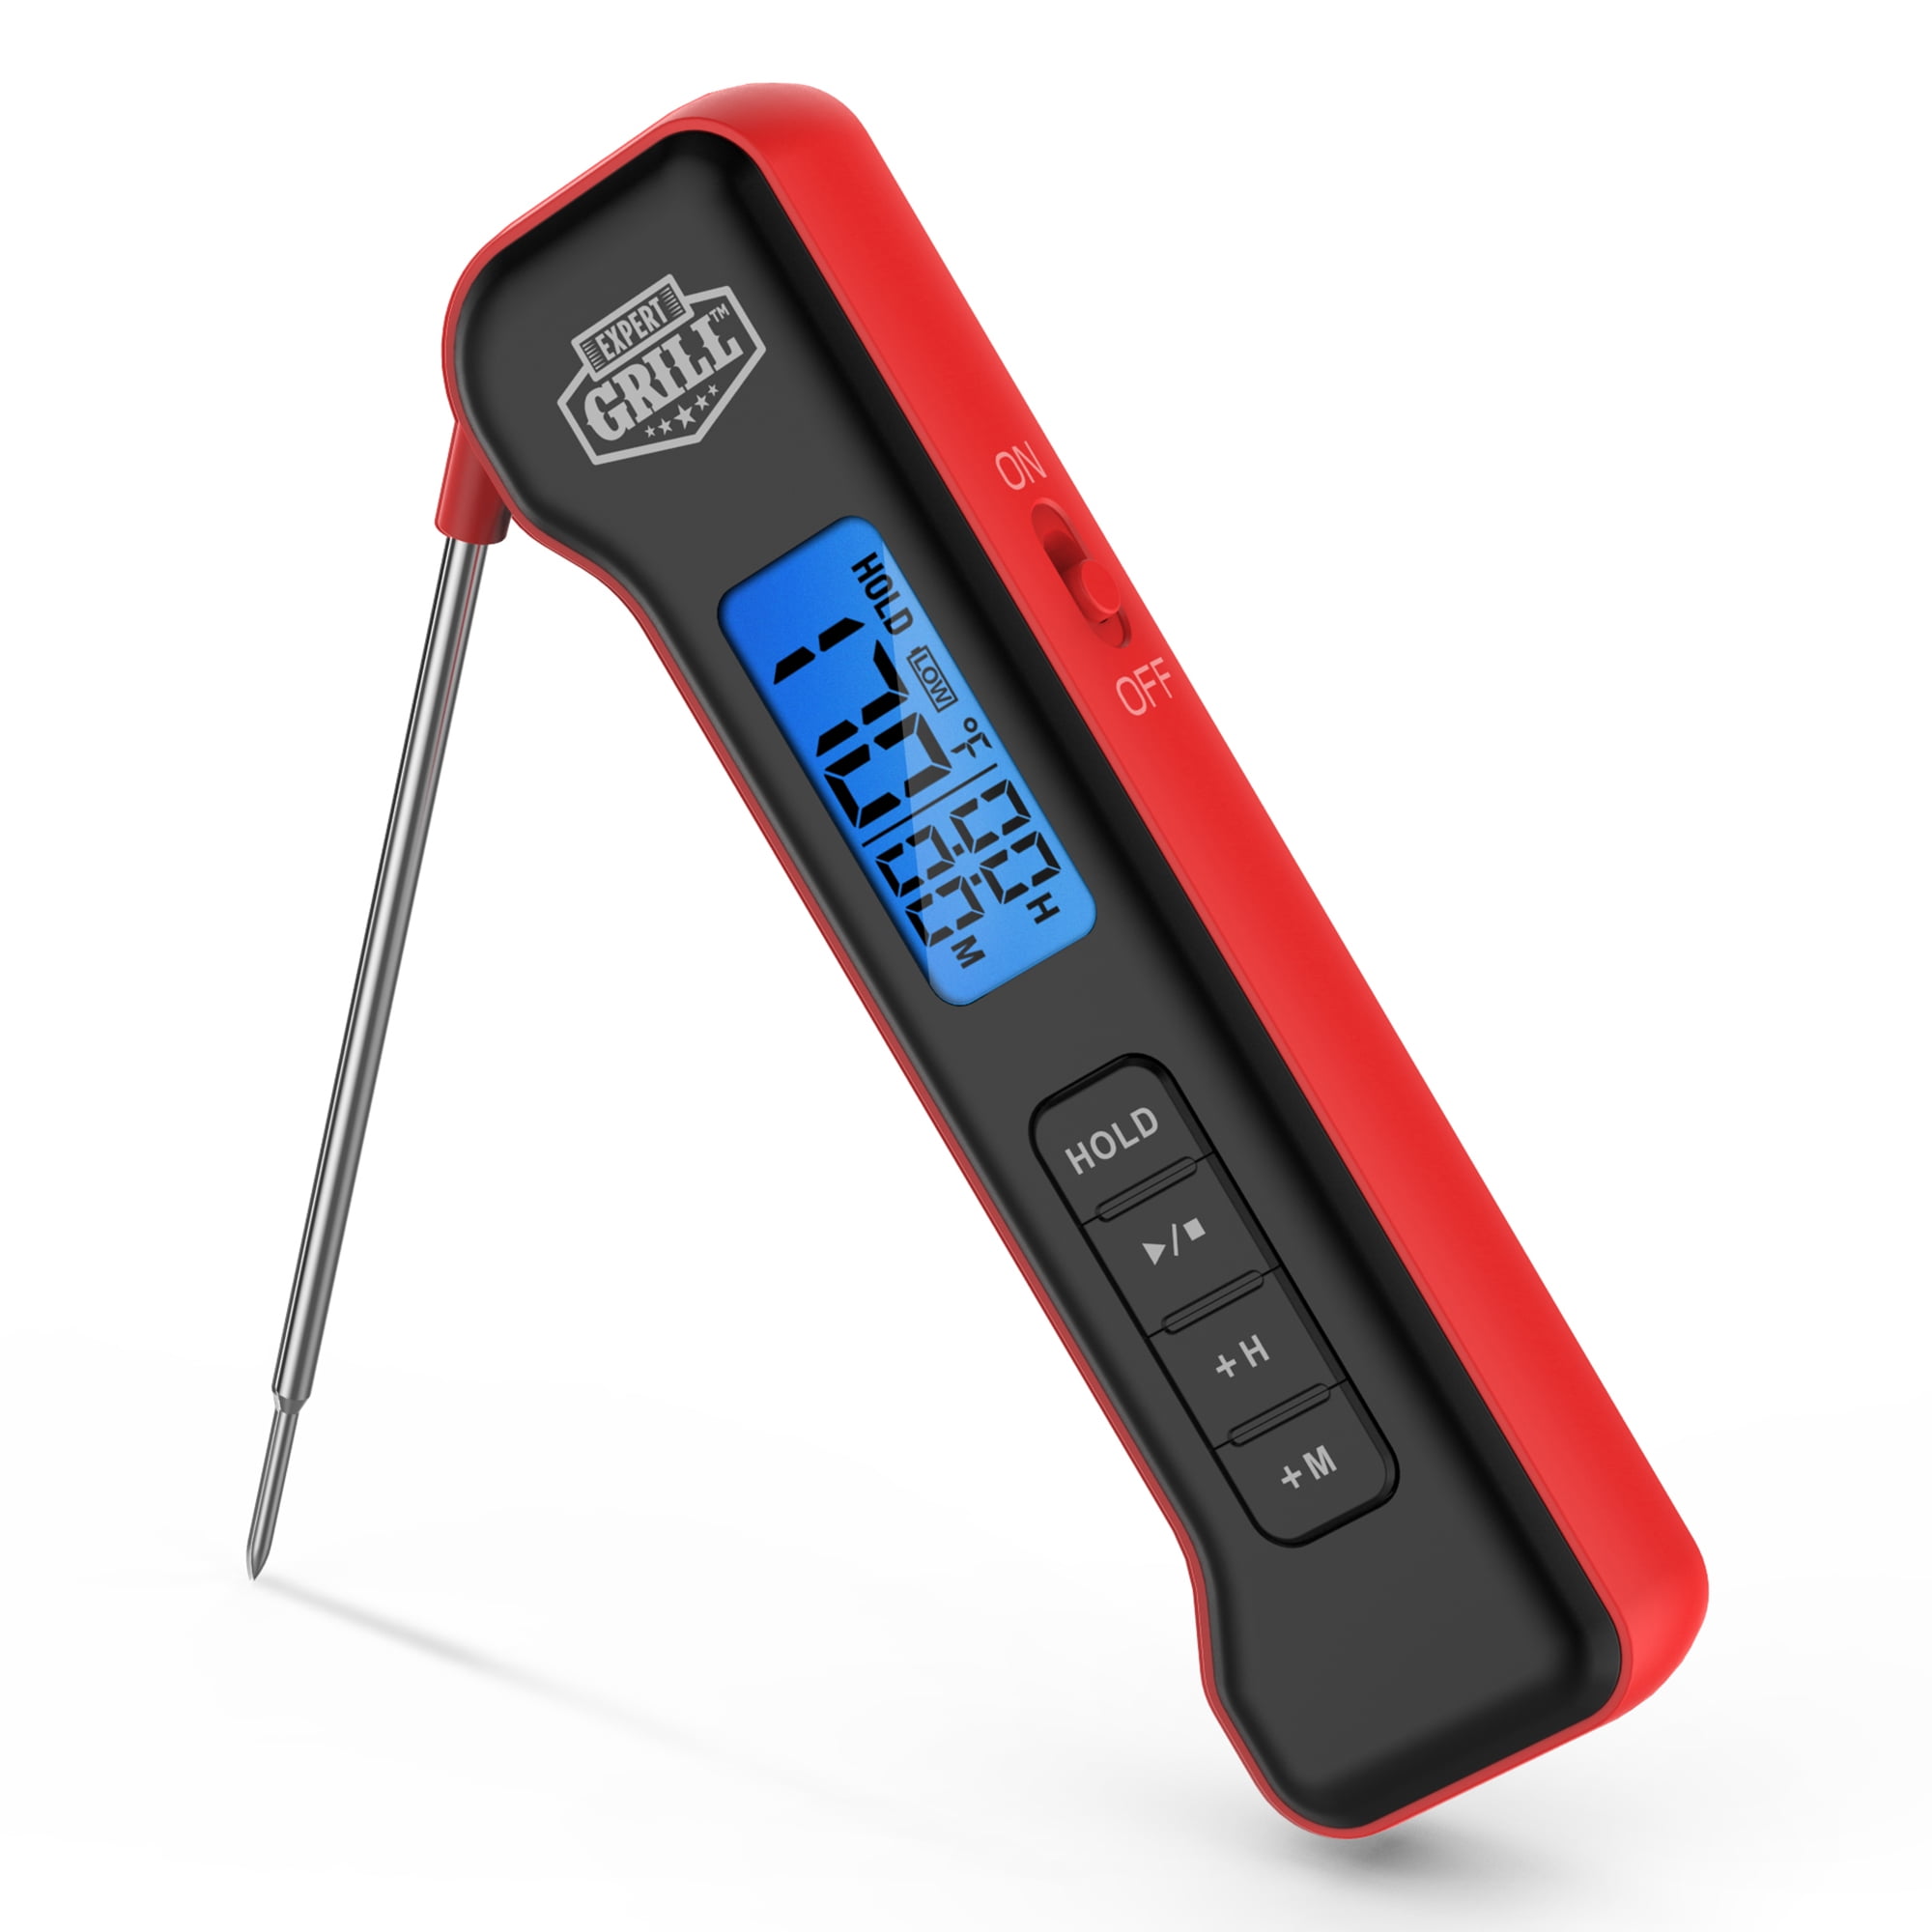 GrillMark Grill Mark Instant Read Digital Meat Thermometer